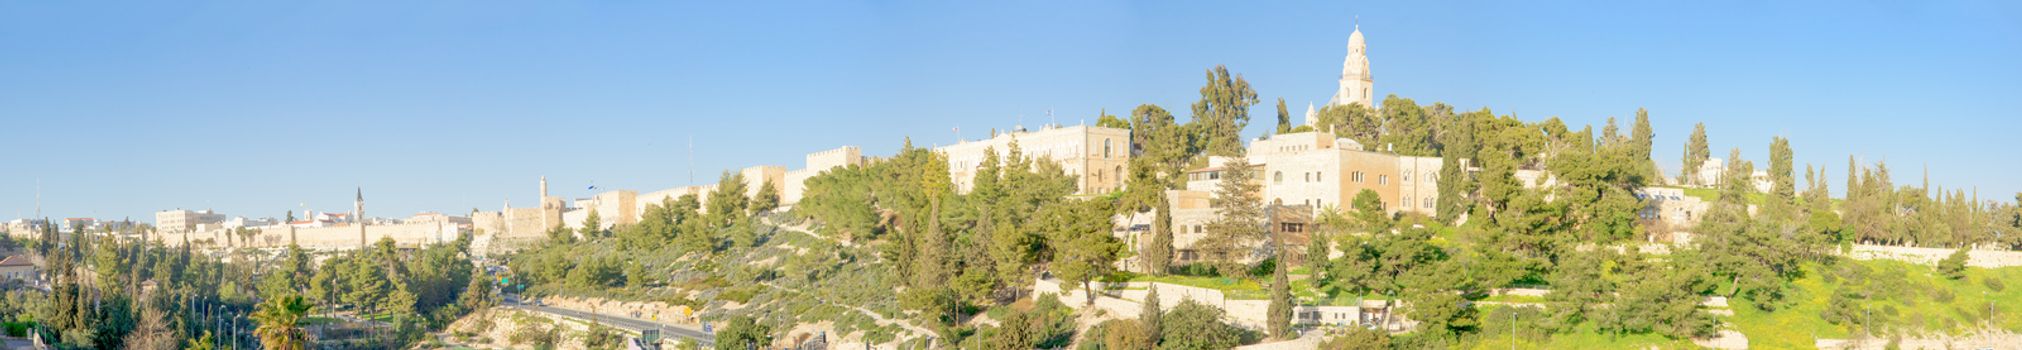 Panoramic view of the old city of Jerusalem, with the wall, tower of David and Mount Zion. Jerusalem, Israel